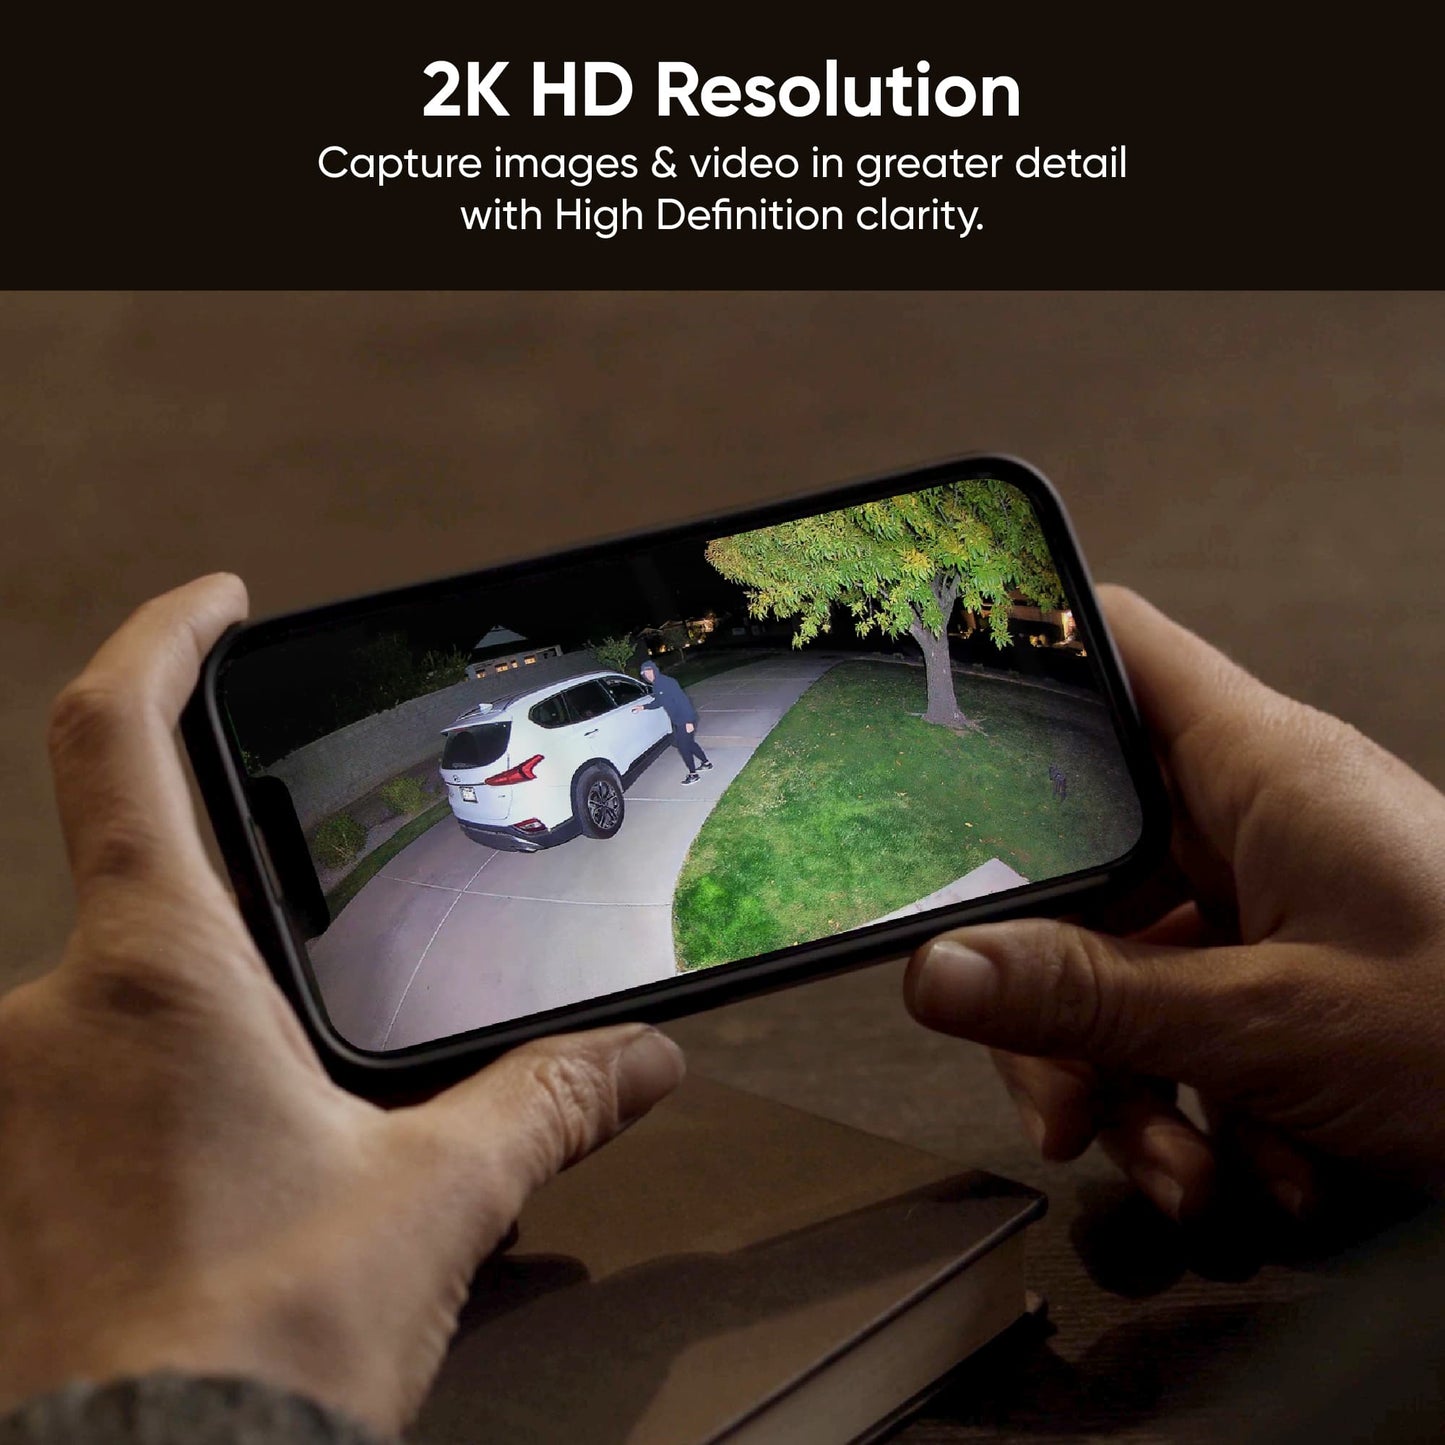 Hands holding phone looking at 2K camera footage with a 160° super-wide view